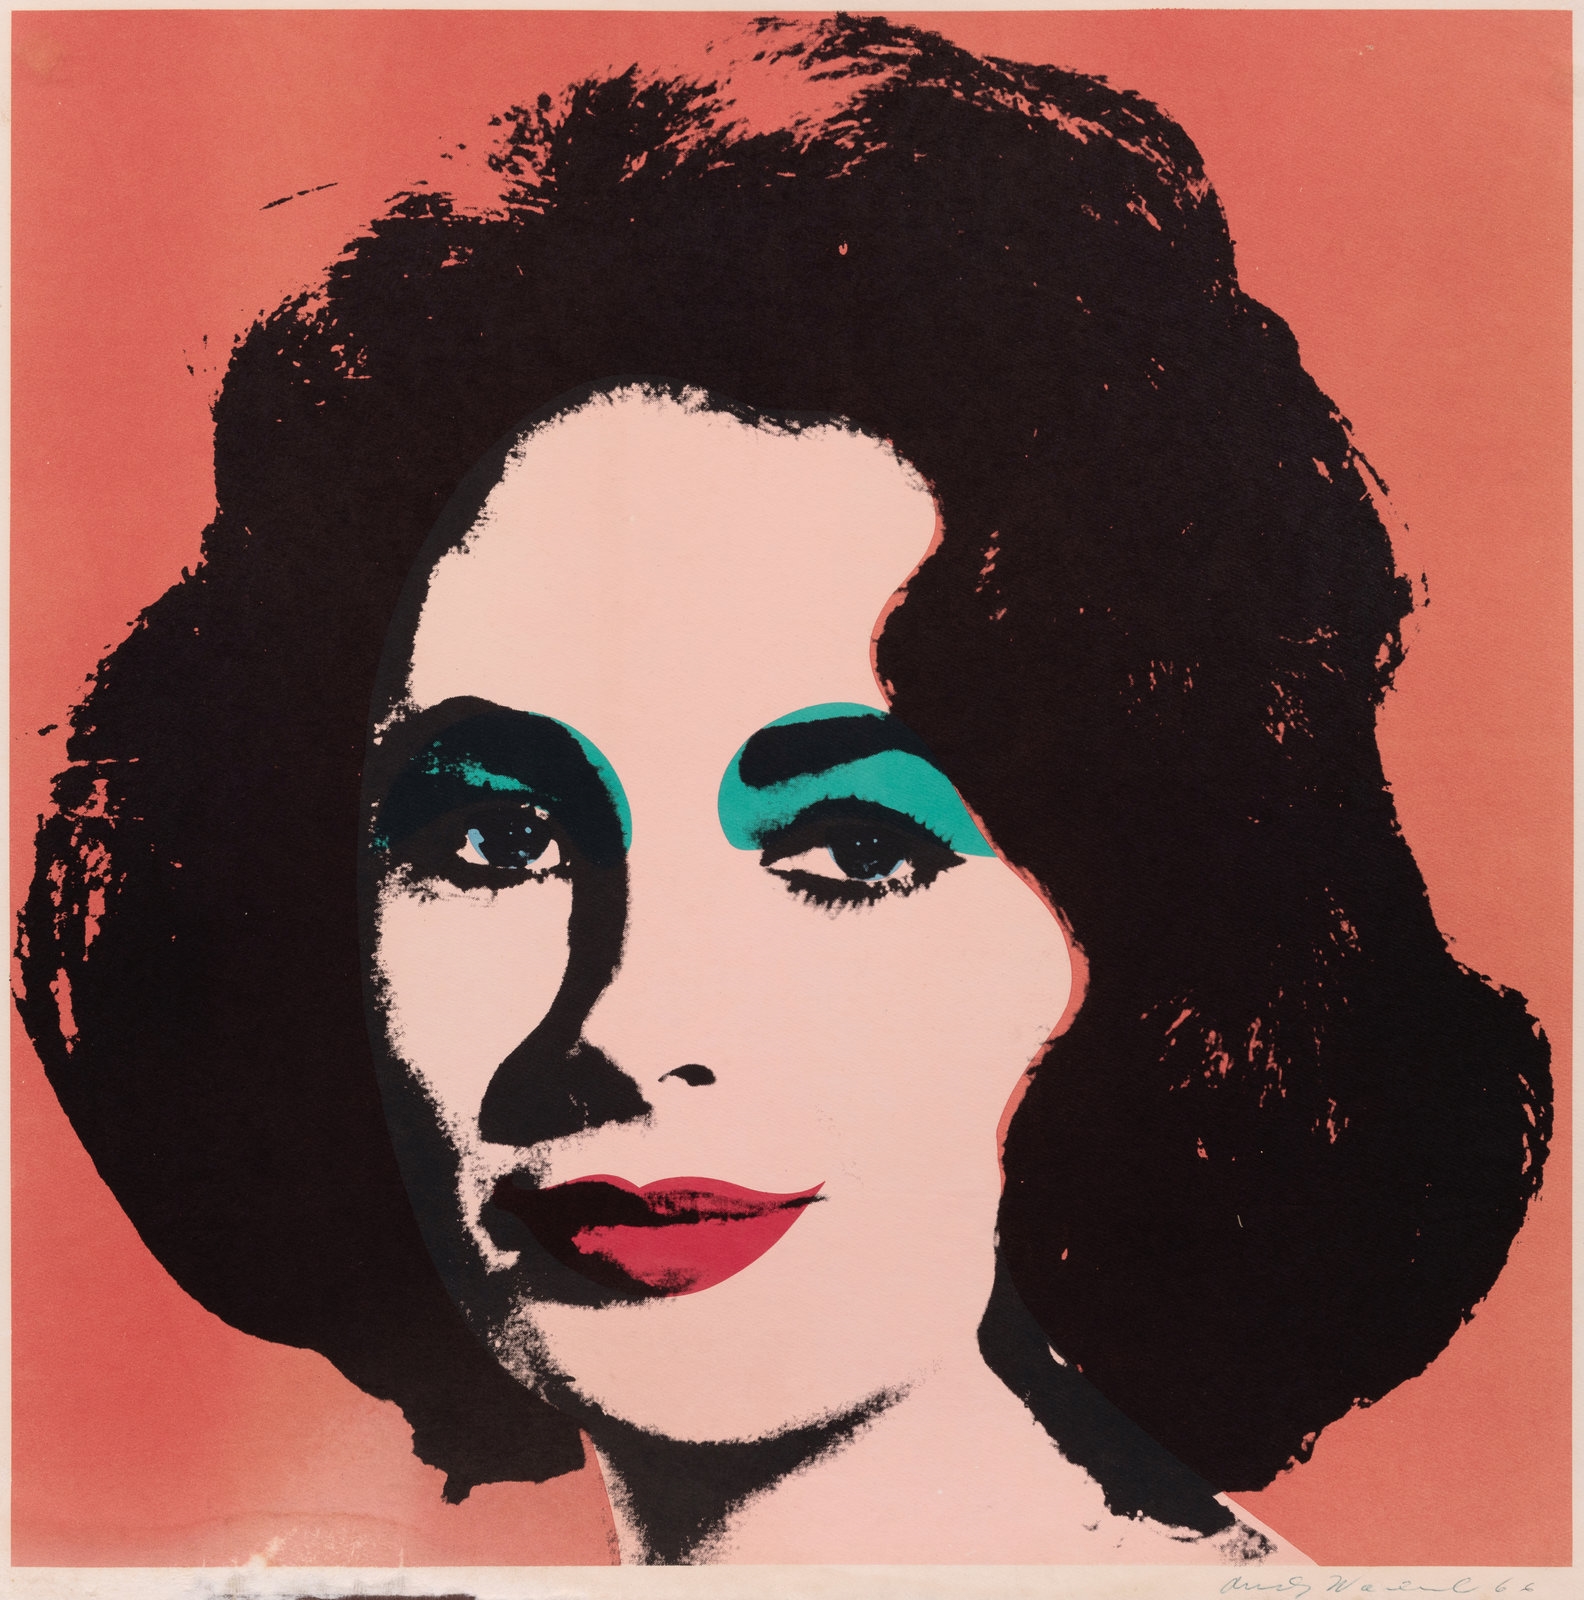 Liz by Andy Warhol, dated 1966